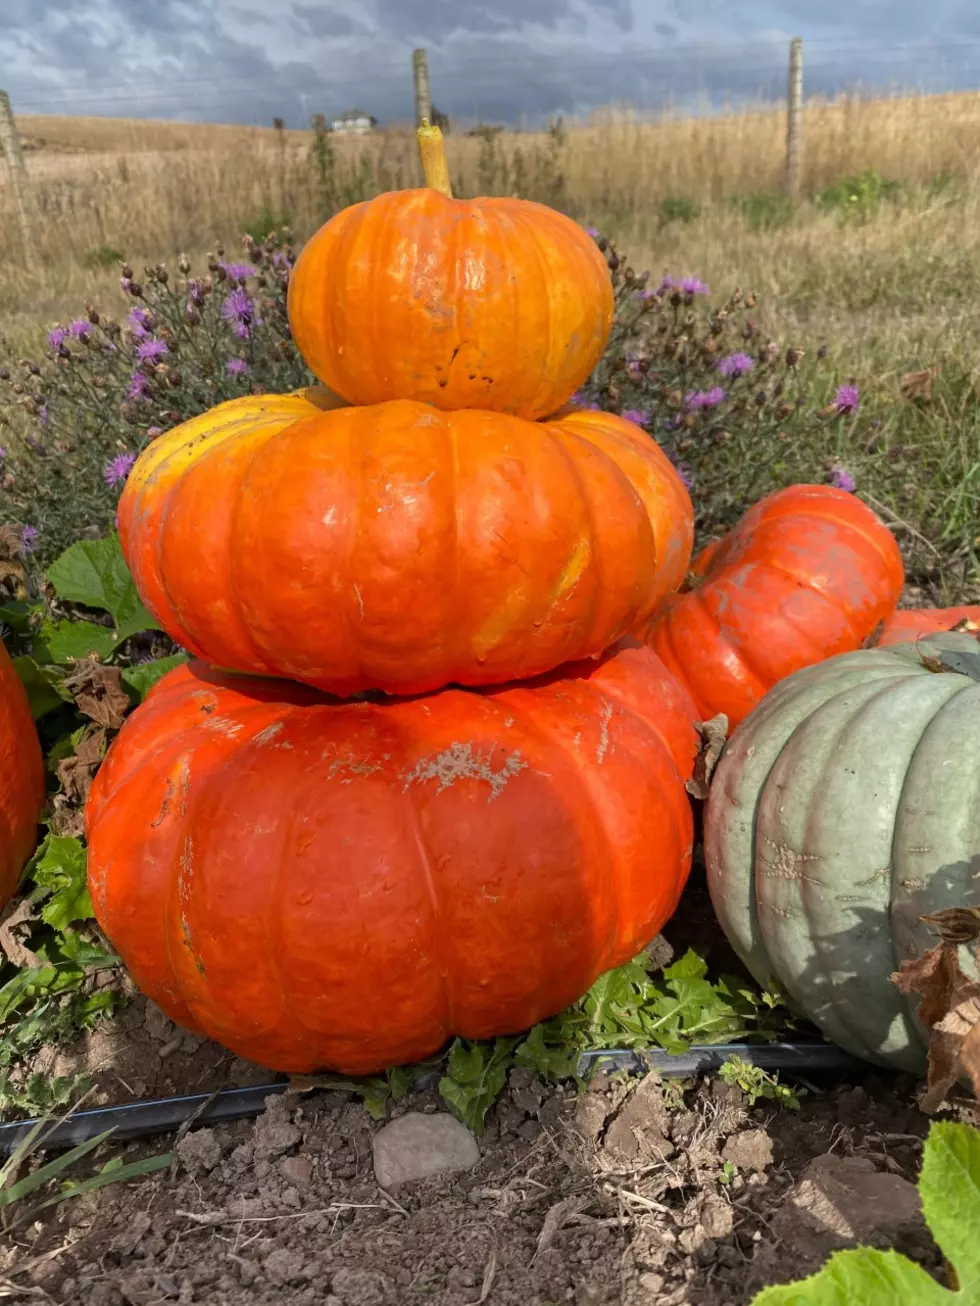 Get a Pumpkin and Help Missoula’s Hungry Population at the Same Time